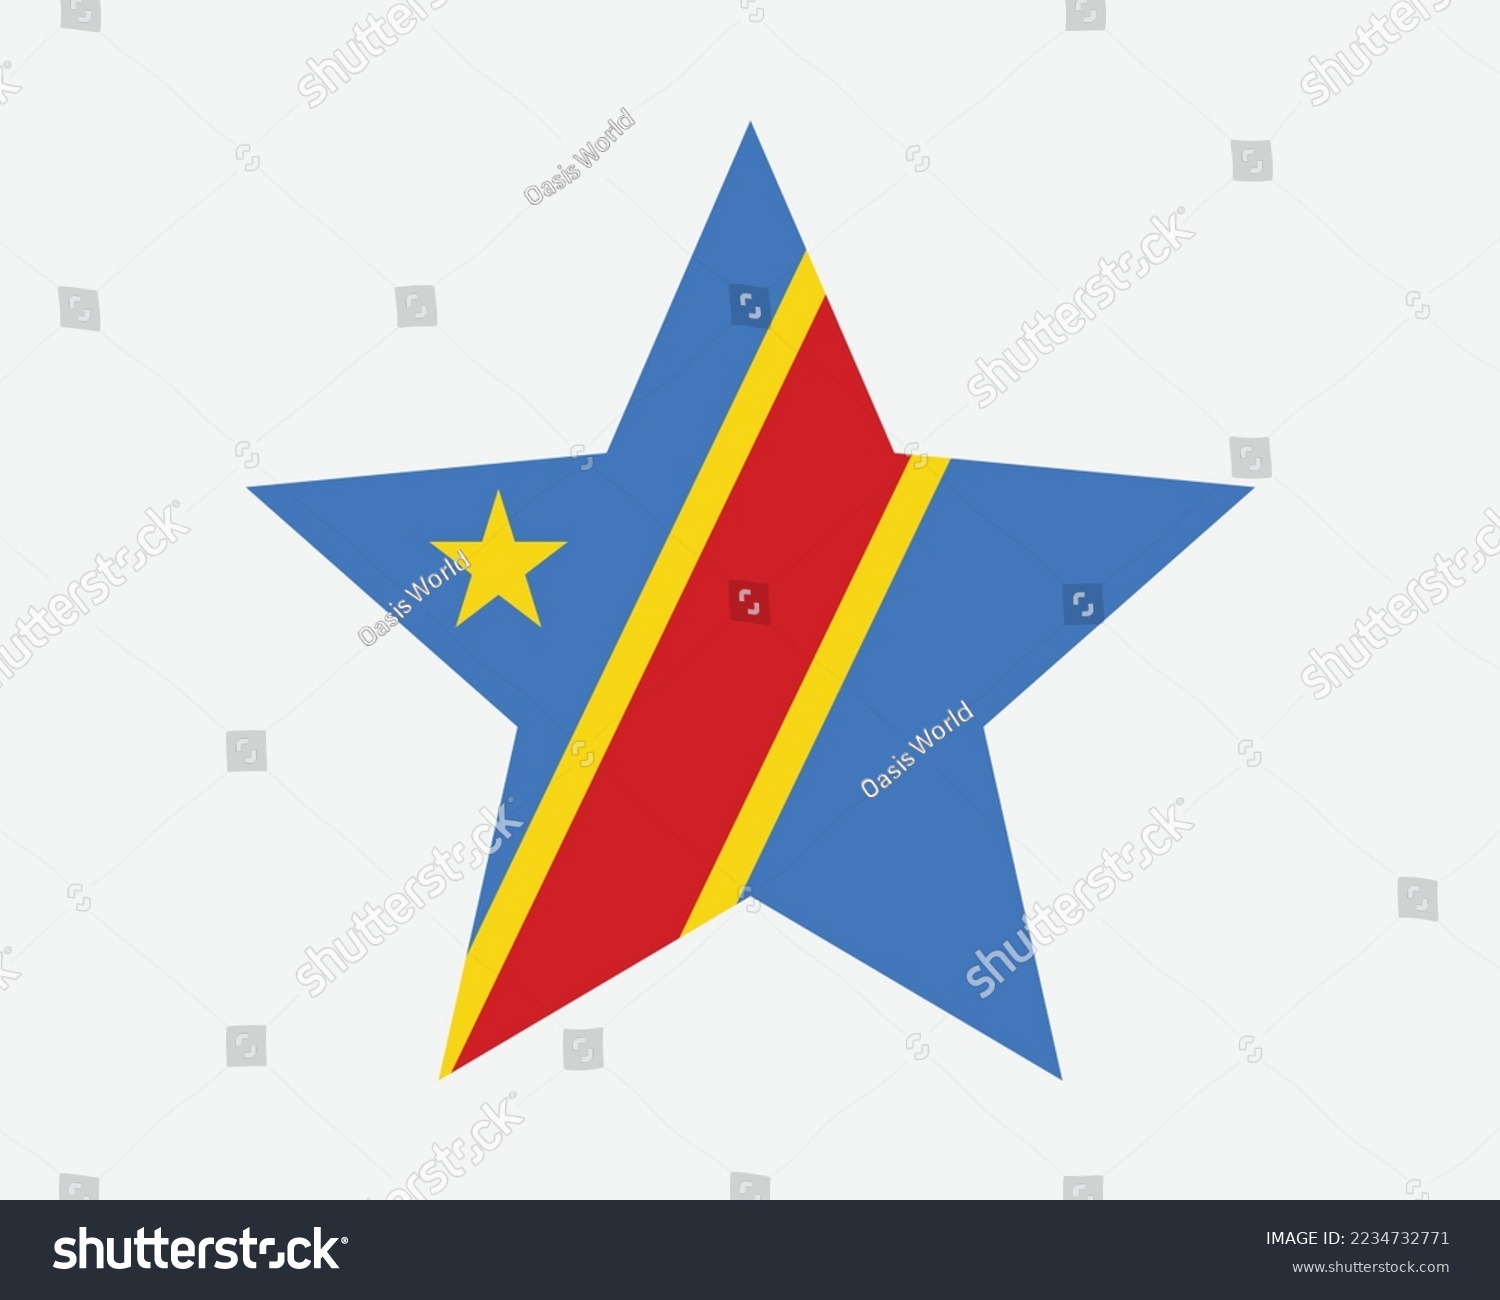 SVG of Democratic Republic of the Congo Star Flag. Congolese Star Shape Flag DROC DRC Country National Banner Icon Symbol Vector Artwork Graphic Illustration svg